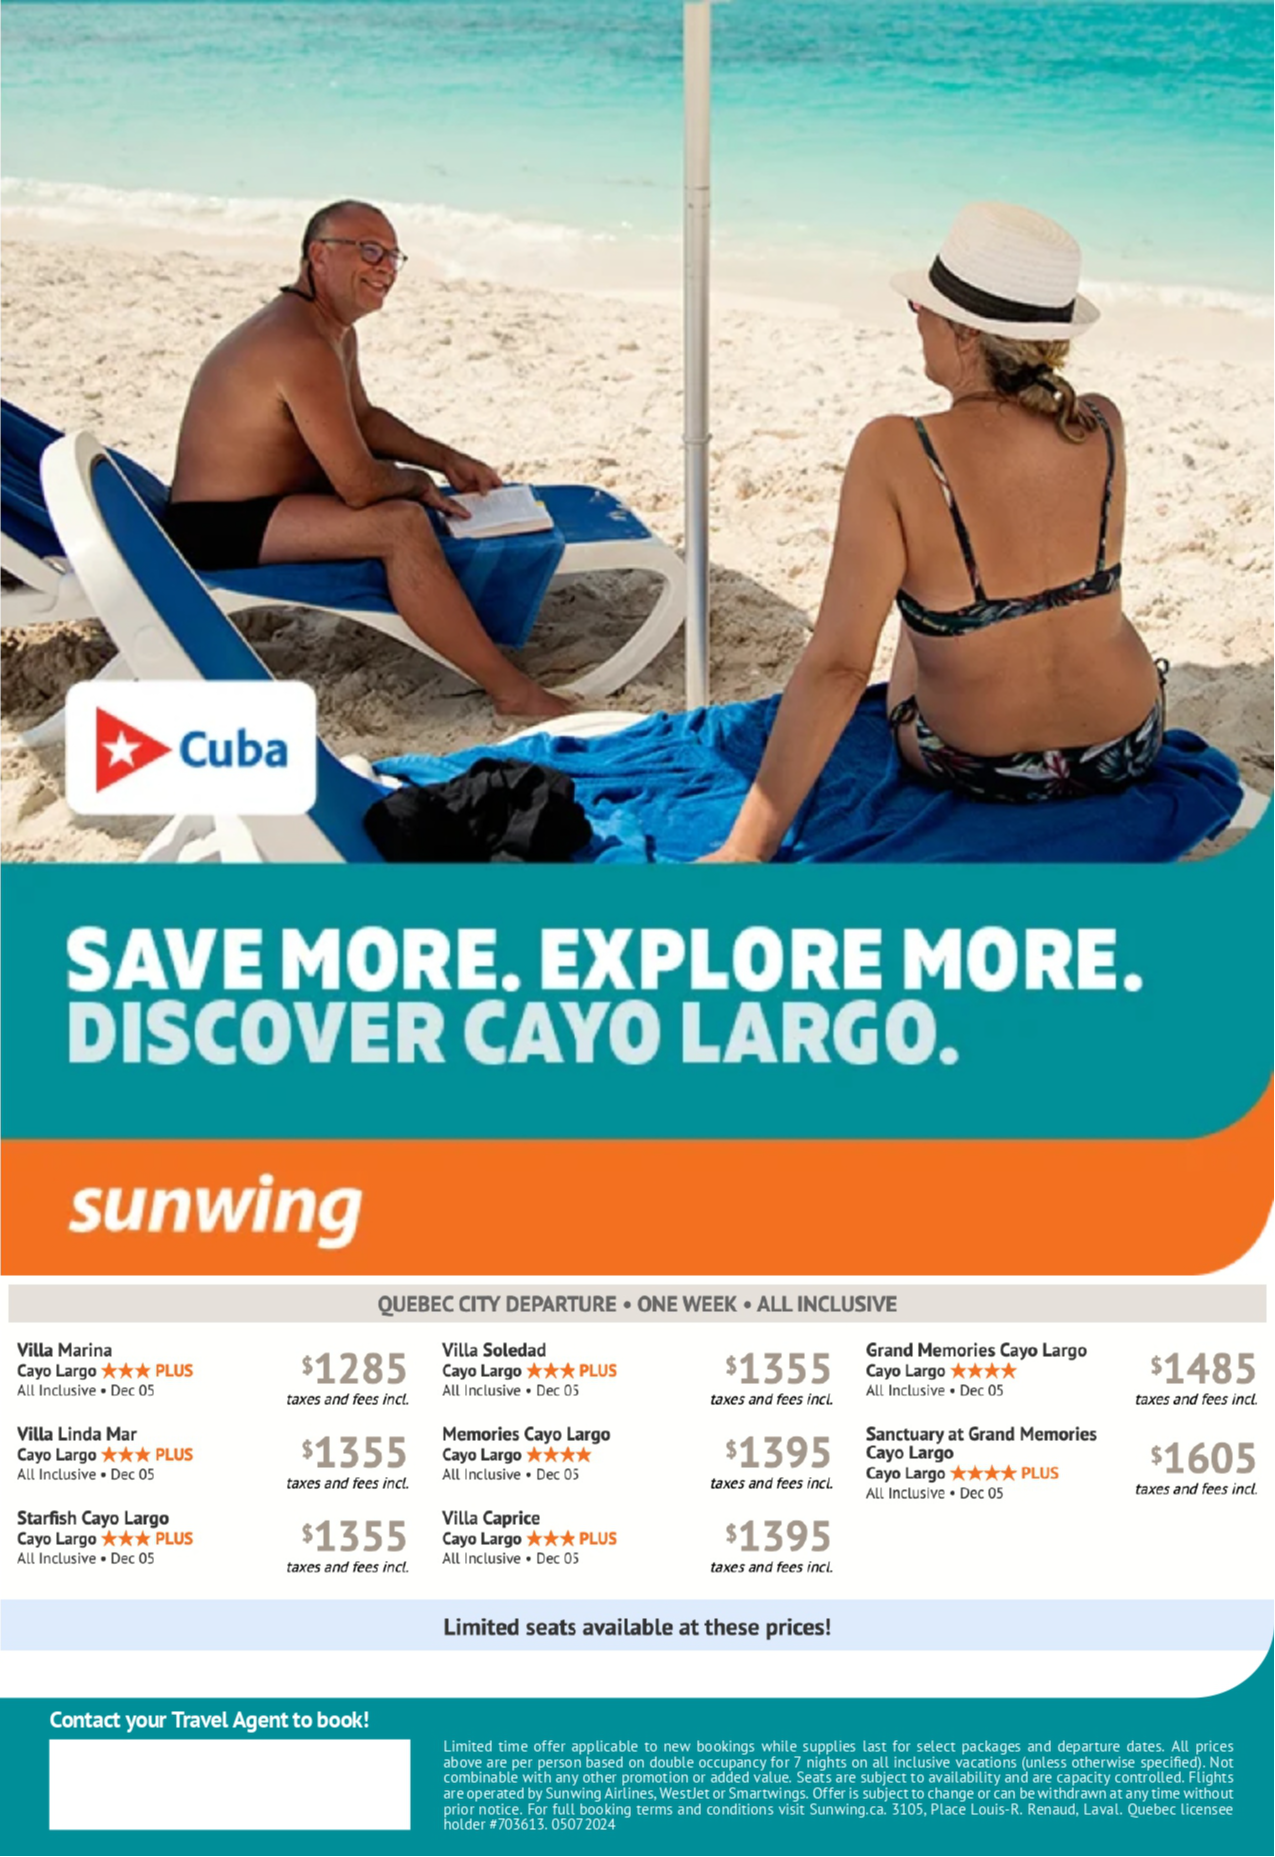 Sunwing Promotions Cancun Save More with Aqua Terra Travel